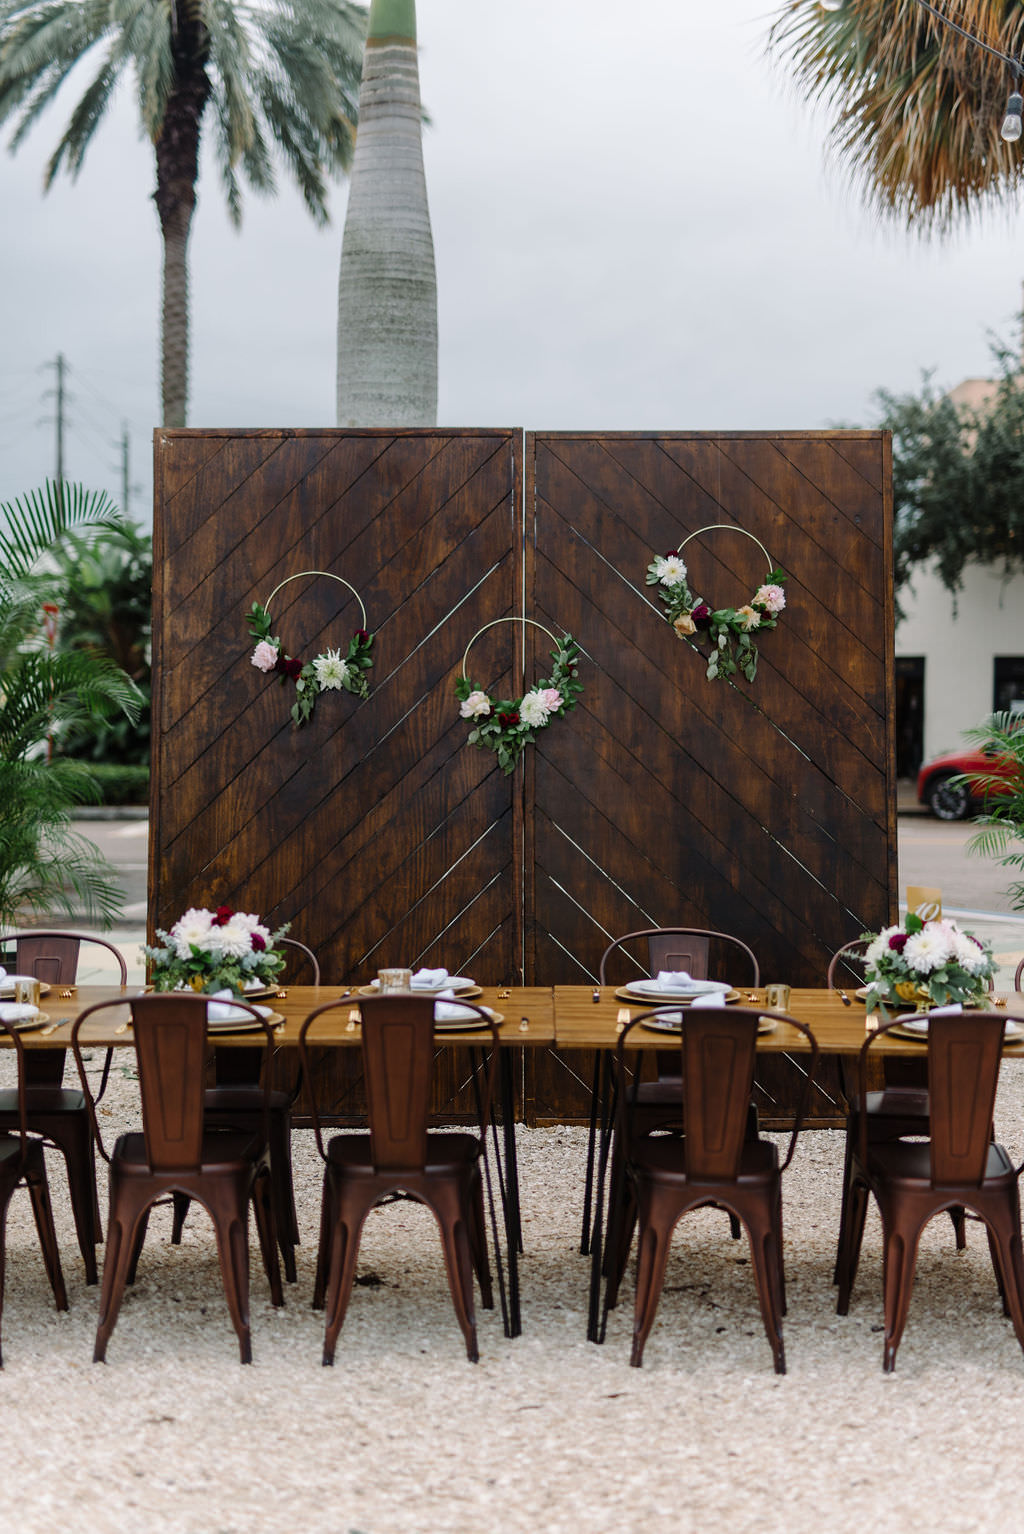 Open Air St. Pete Wedding Reception with Wooden Accent Wall and Metal Chairs | Outdoor St. Pete Wedding Reception Venue Intermezzo